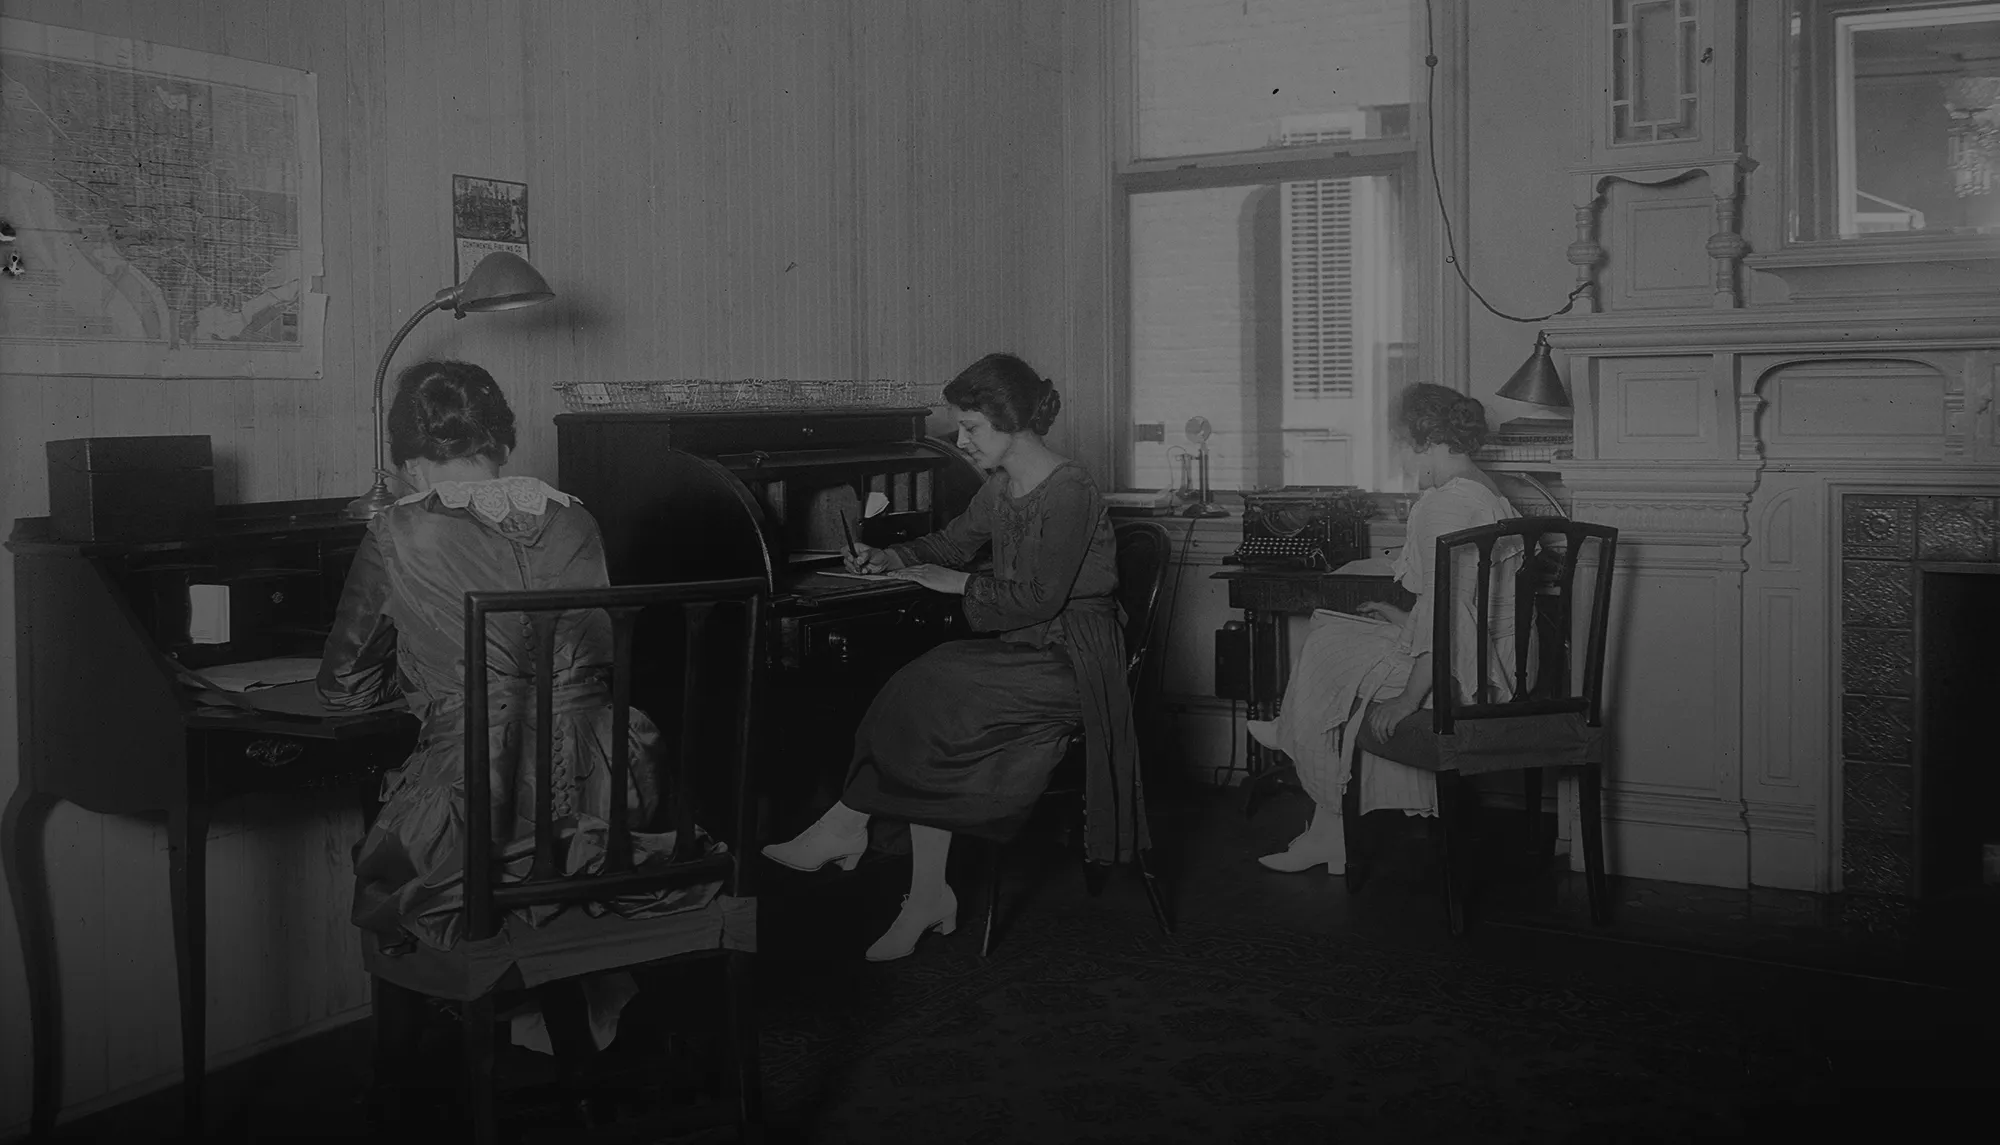 History of Women in the Workplace